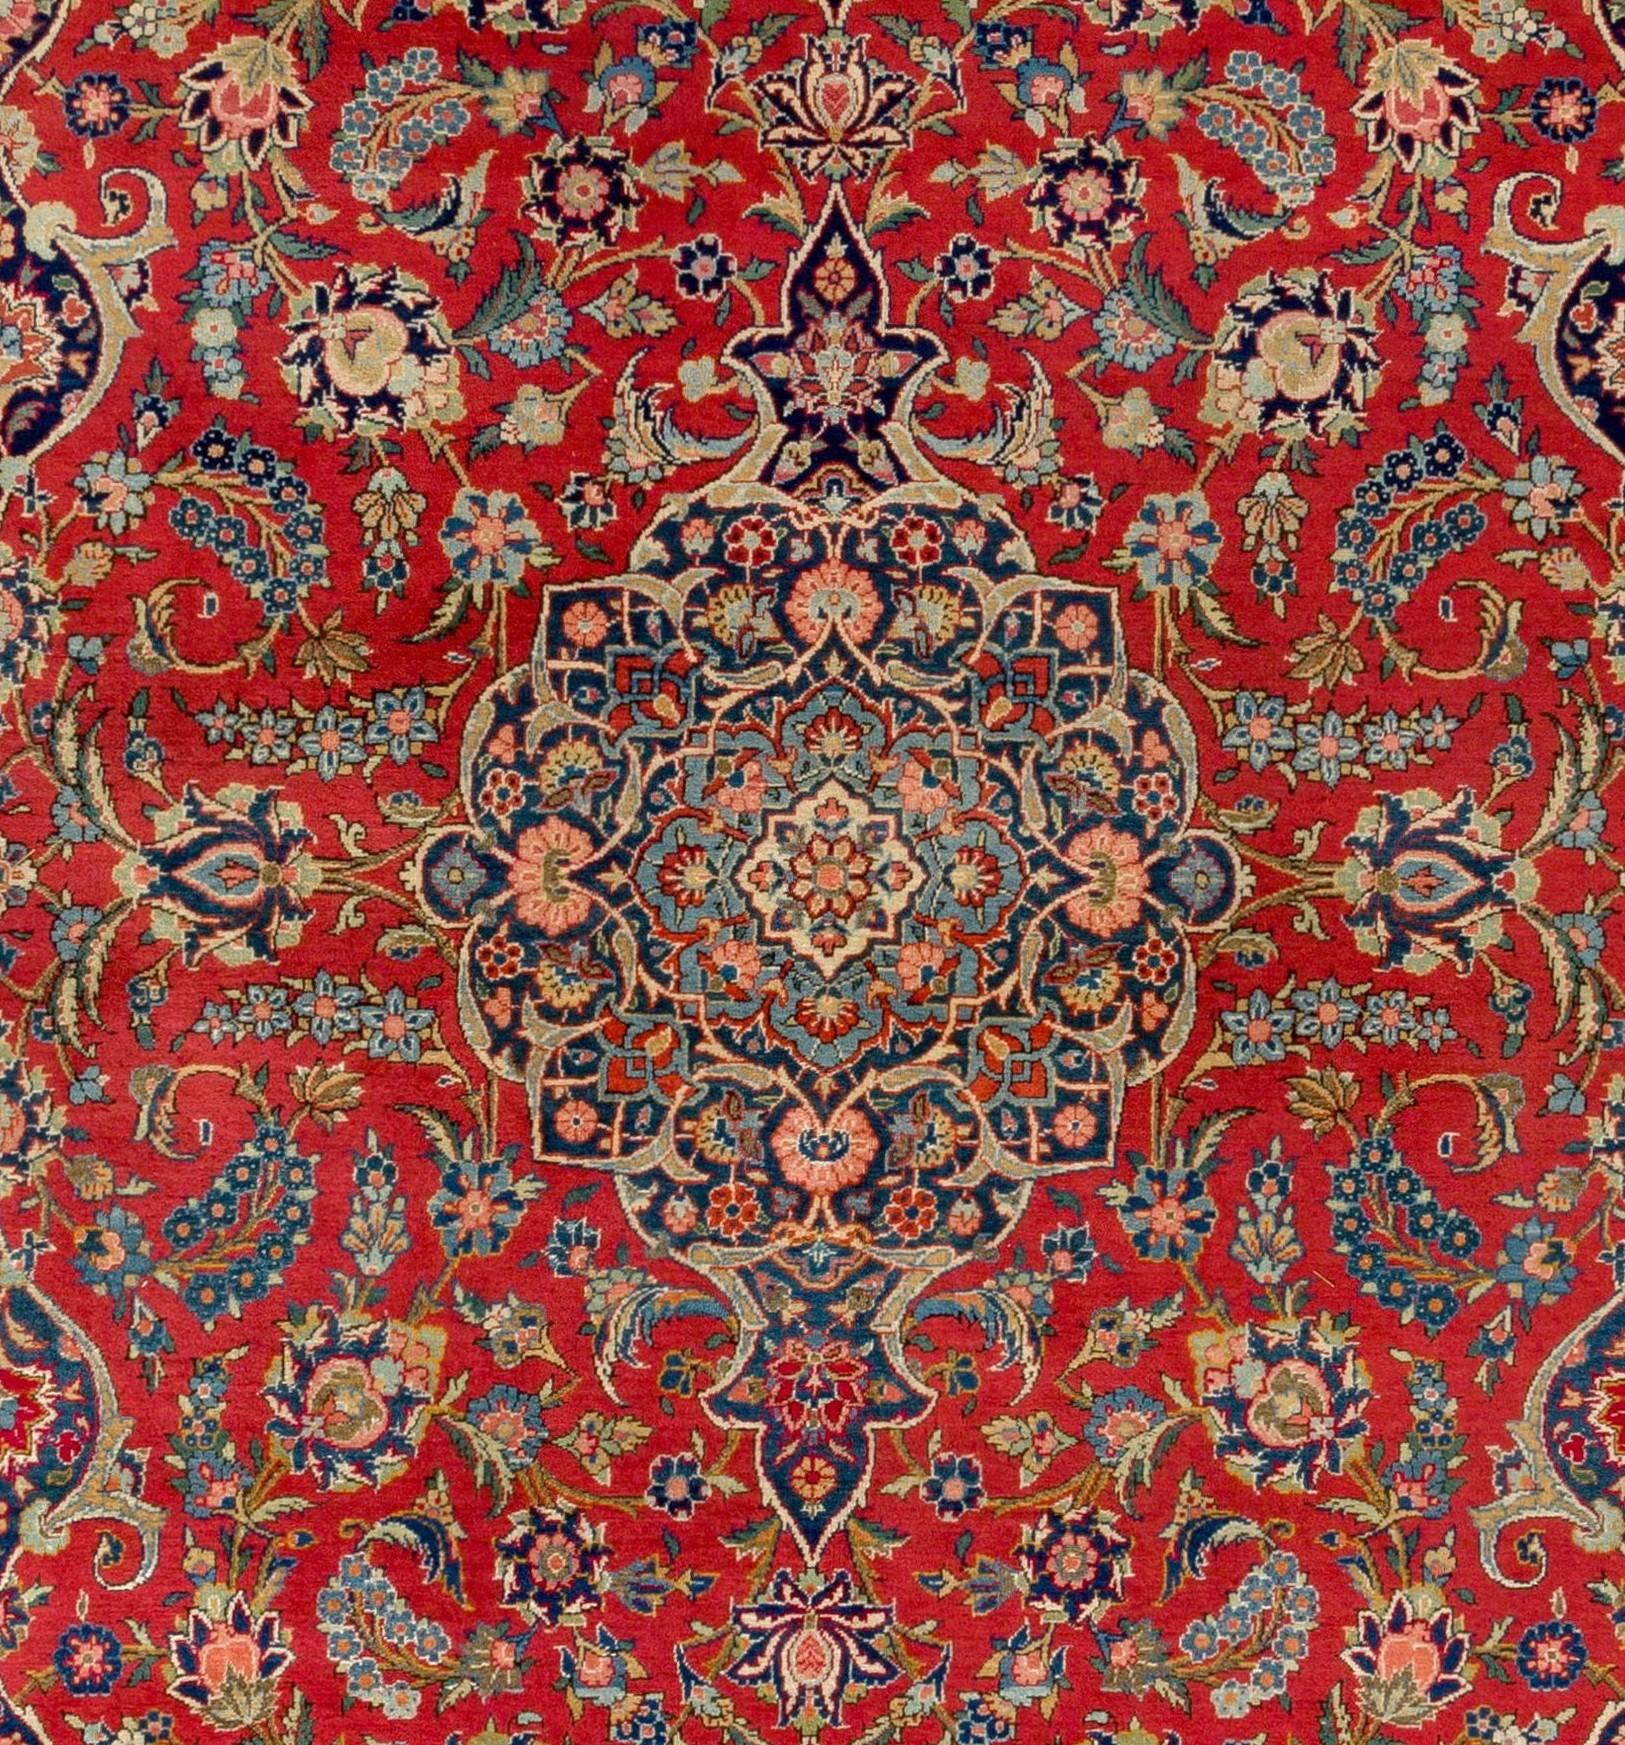 Hand-Woven 7.1 x 10.6 Ft Fine Antique Persian Kashan Rug